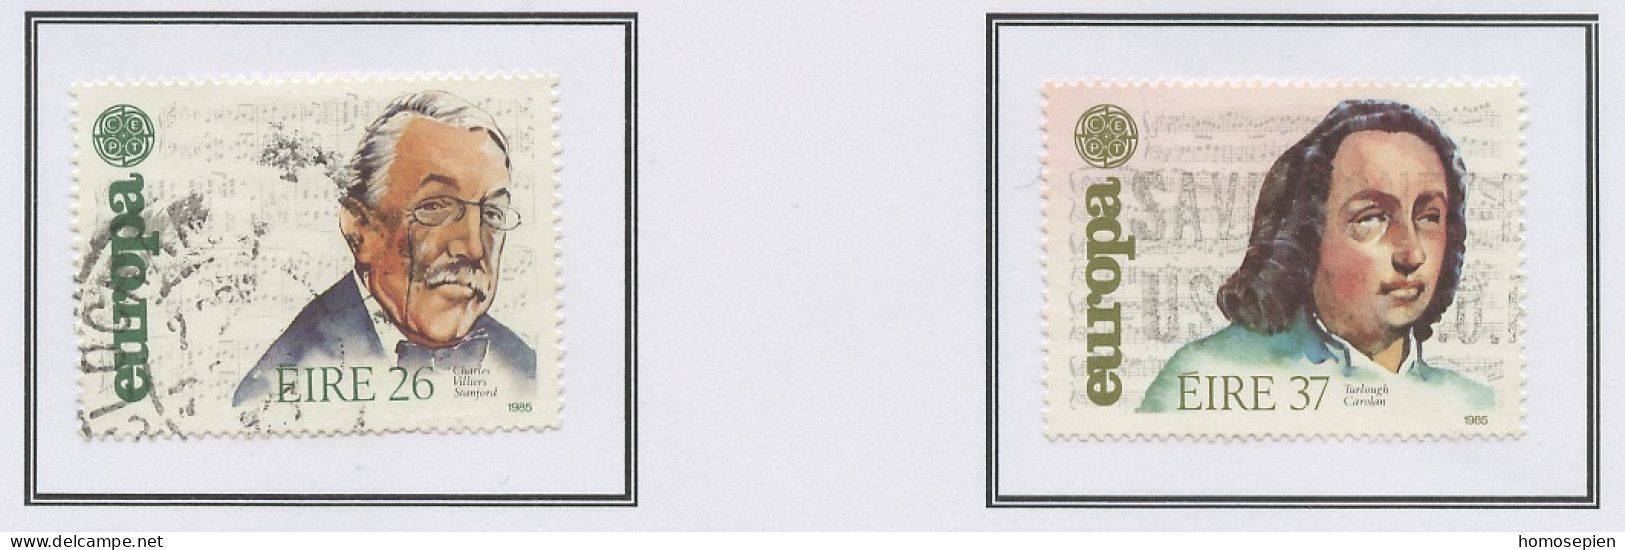 Irlande - Ireland - Irland 1985 Y&T N°566 à 567 - Michel N°563 à 564 (o) - EUROPA - Used Stamps